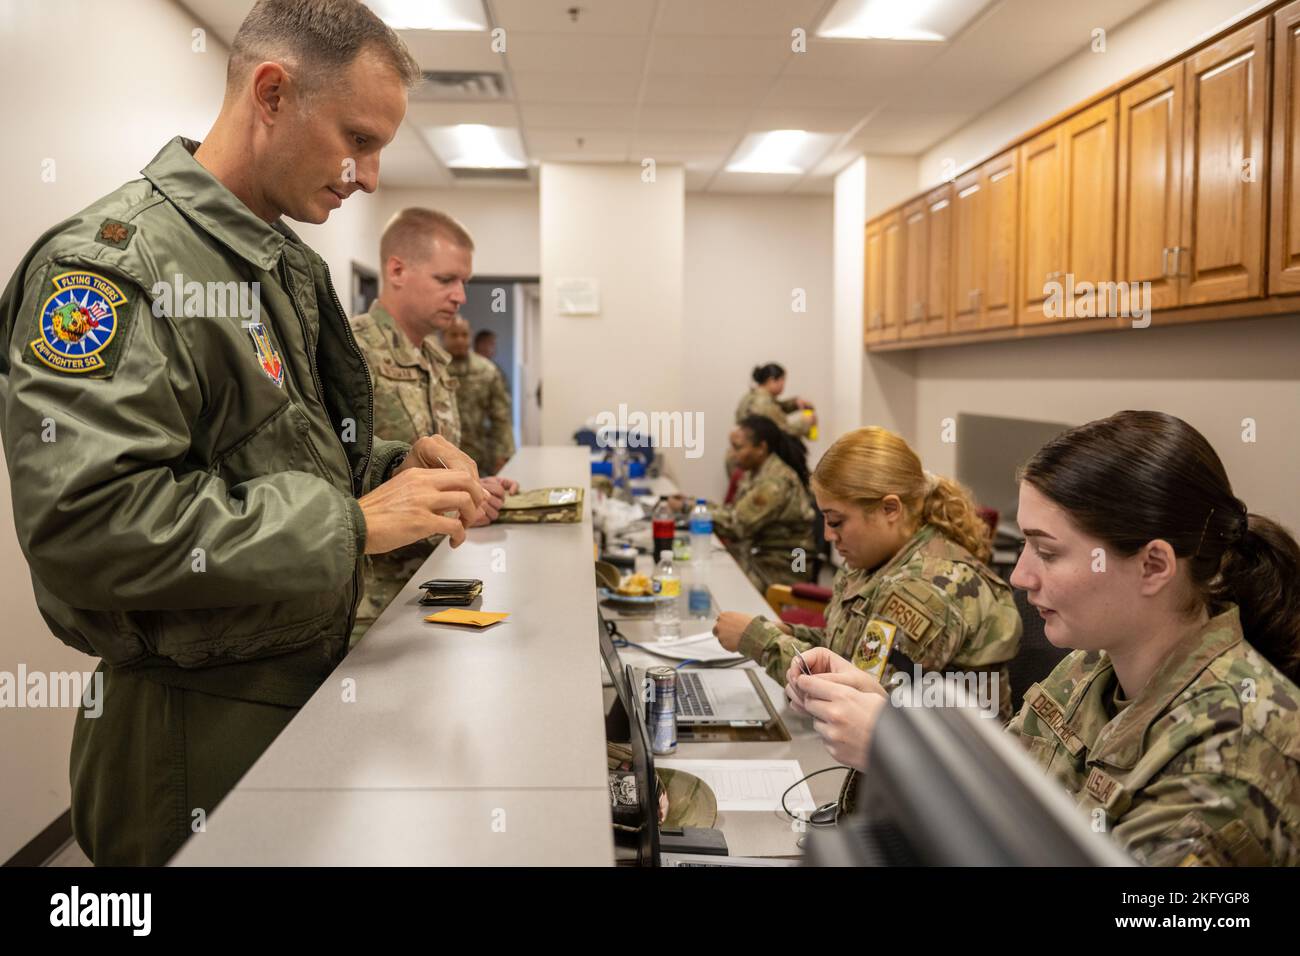 U.S. Air Force Airmen assigned to the 23rd Wing process through a personnel deployment function line at Moody Air Force Base, Georgia, Oct. 14, 2022. The PDF line ensures personnel are properly equipped with government travel cards, valid identification, and deployment documentation, as well as receiving any required vaccinations. The 23rd Wing deployed A-10C Thunderbolt II aircraft and support personnel to Andersen Air Force Base, Guam for a routine Dynamic Force Employment Operation. Stock Photo